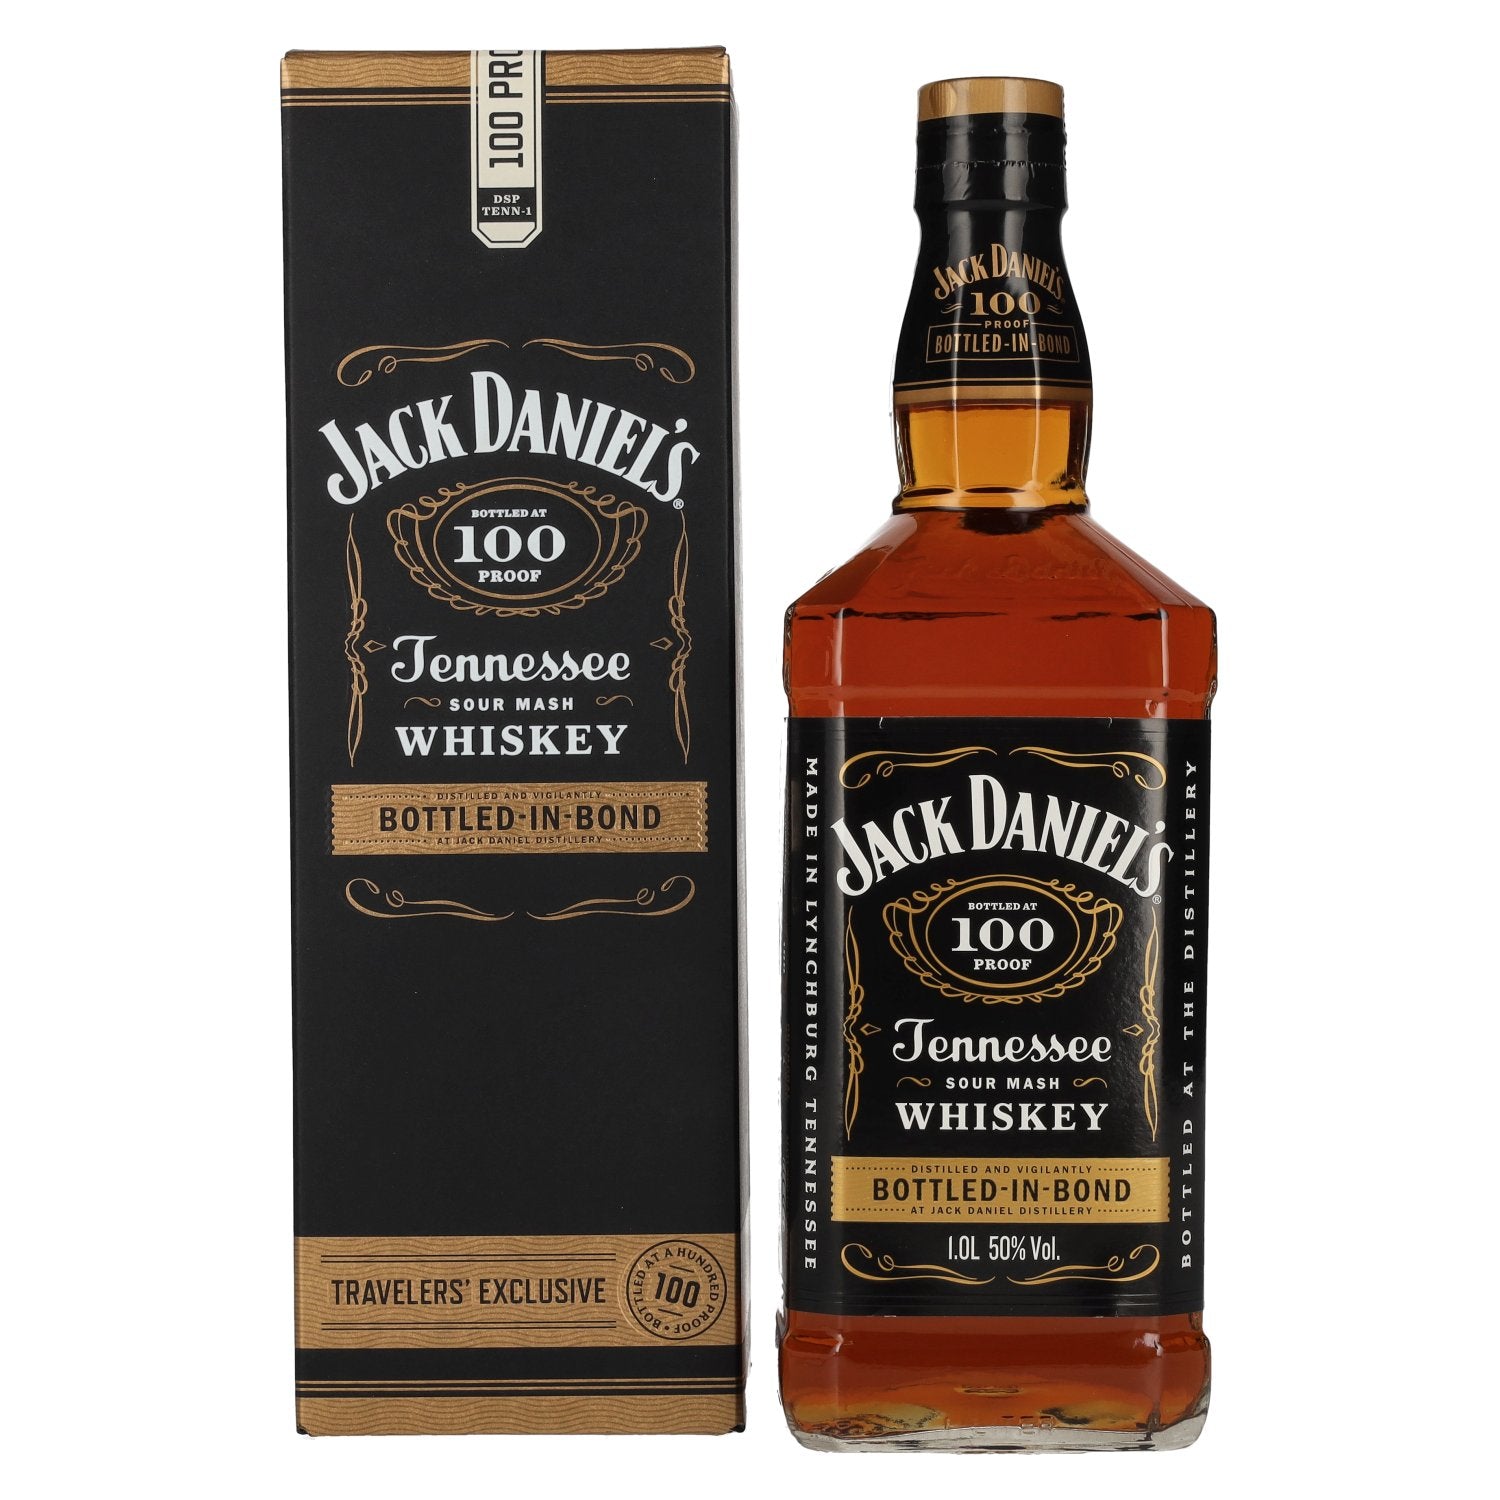 Jack Daniel's BOTTLED-IN-BOND Tennessee Sour Mash Whiskey 50% Vol. 1l in Giftbox